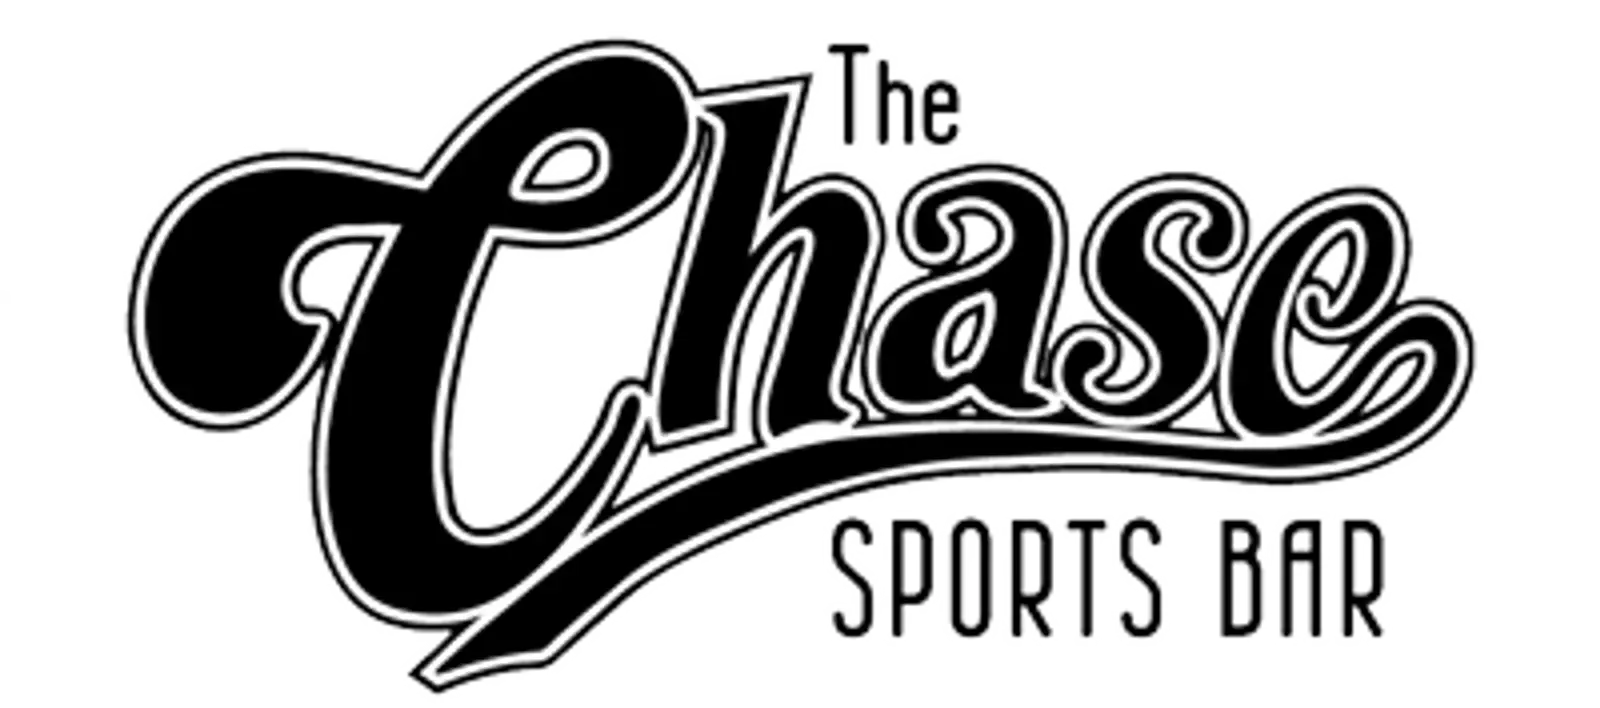 The Chase Bar and Grill logo